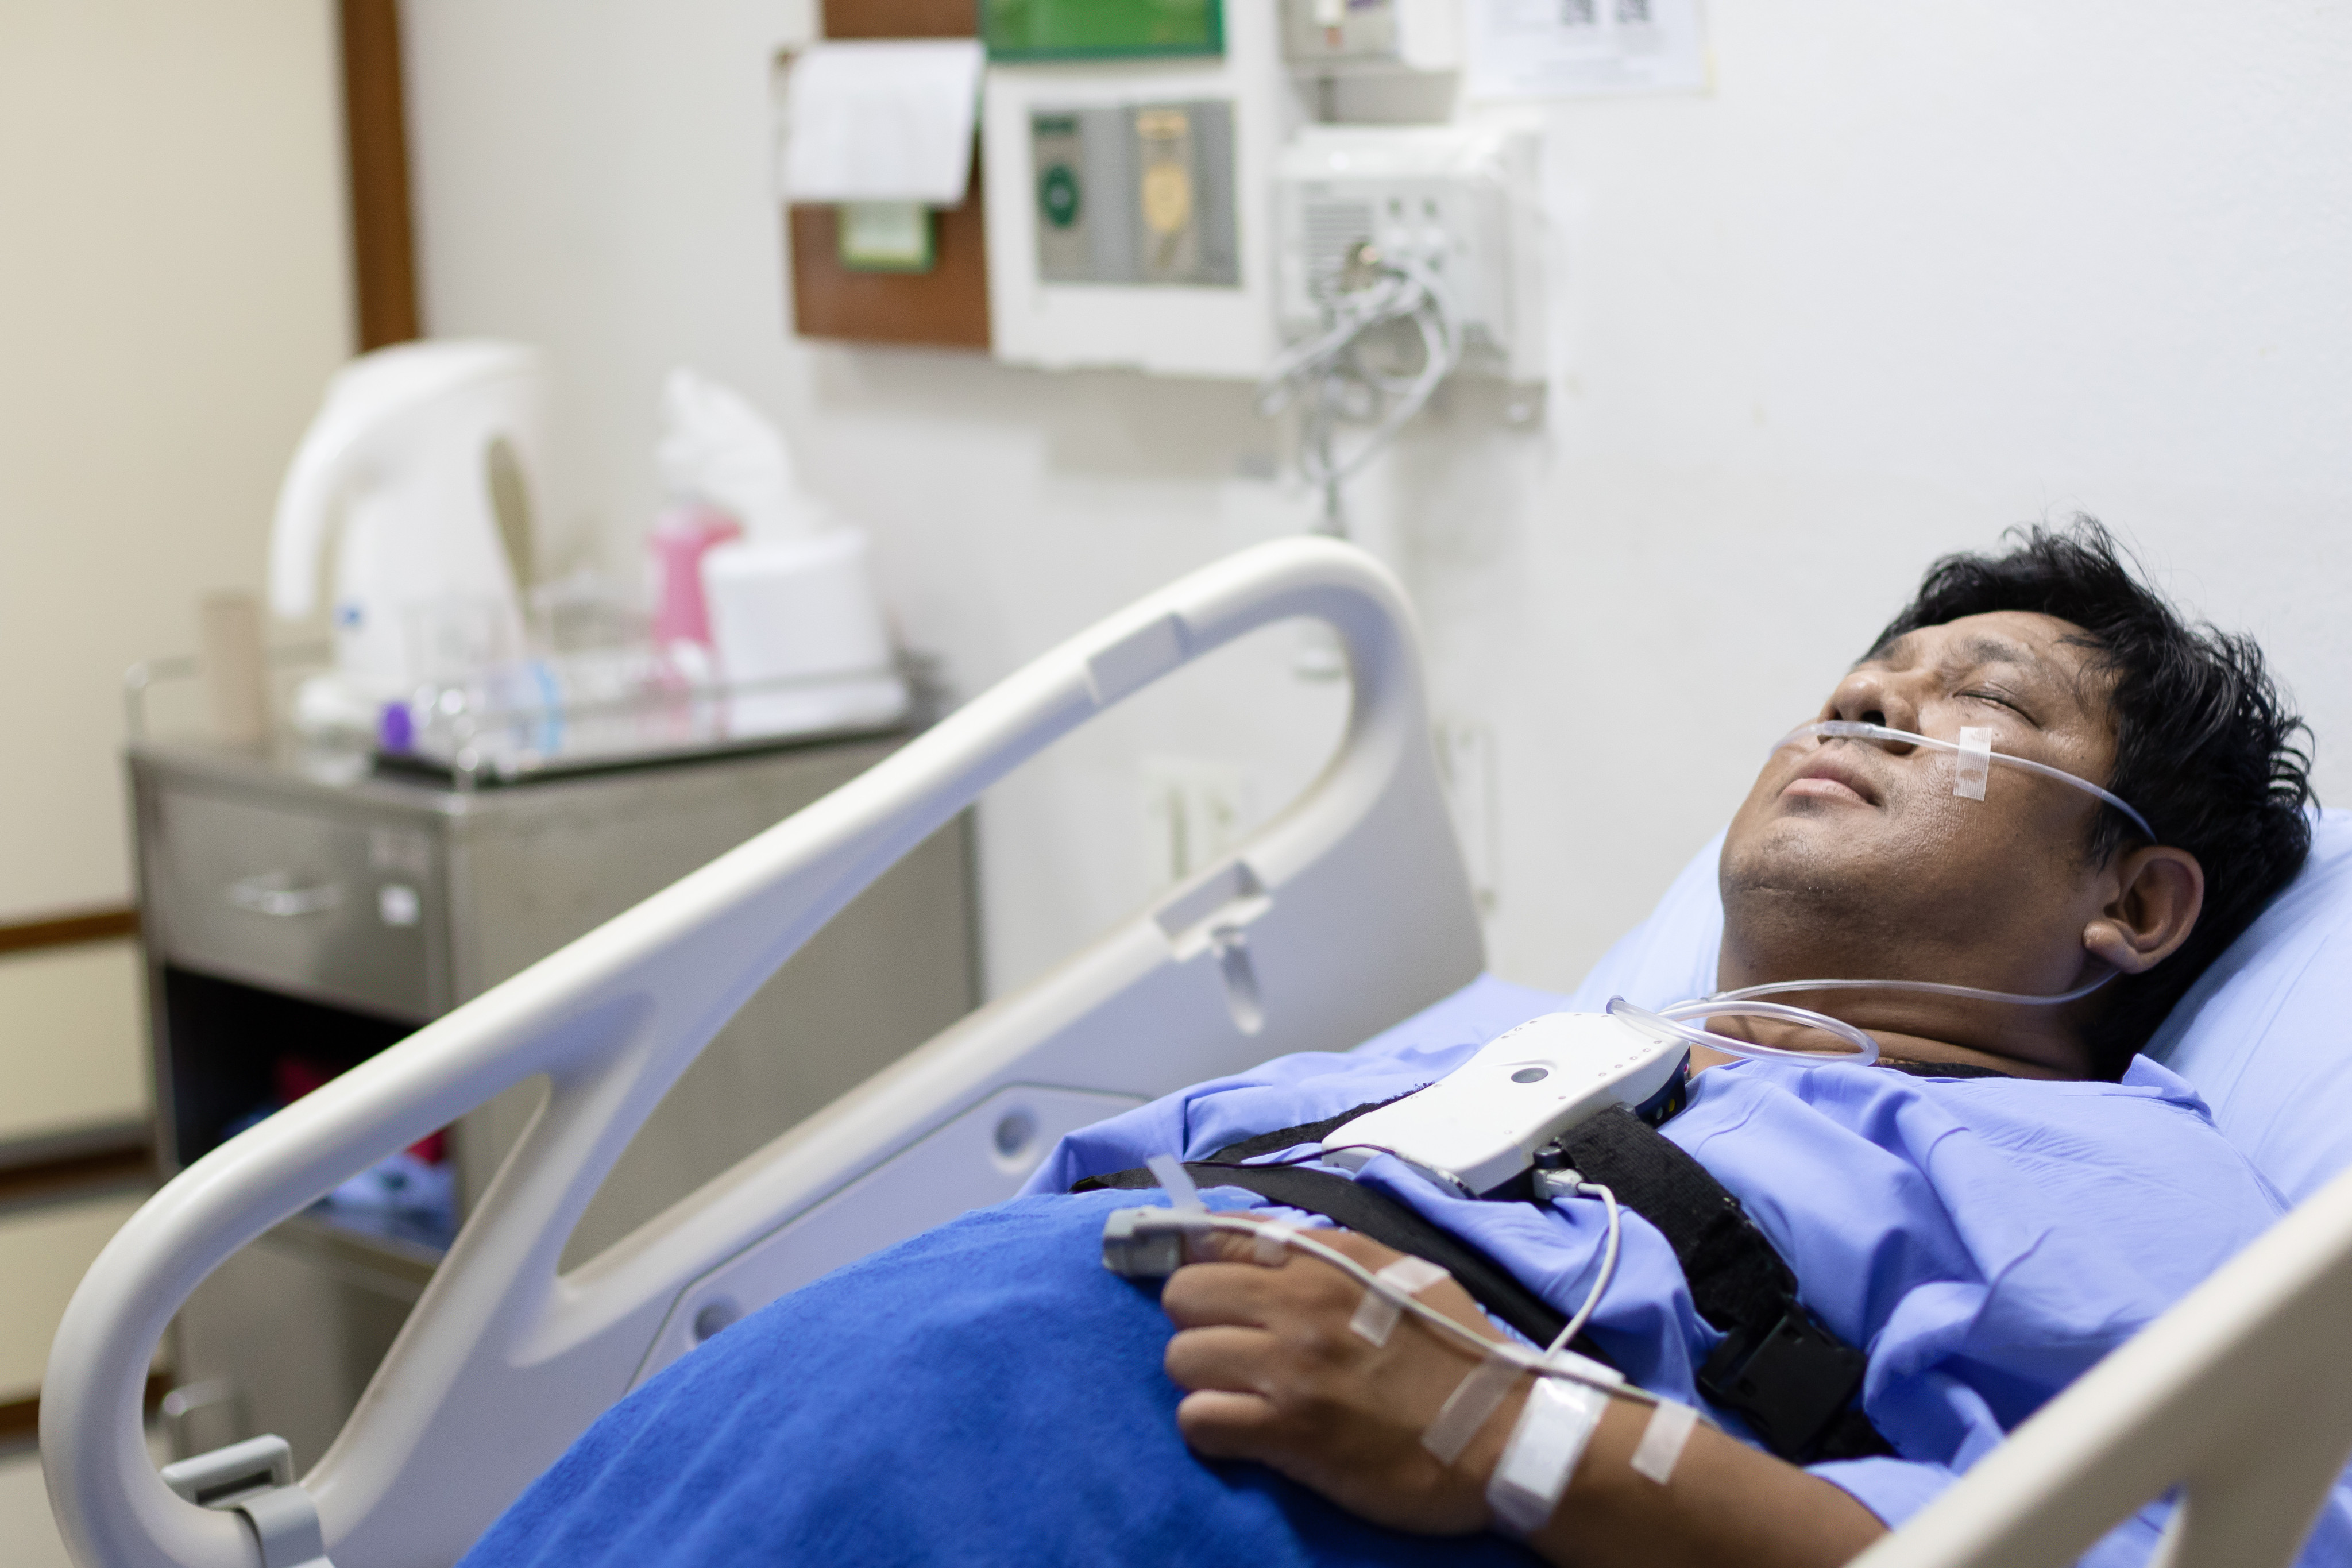 People with a high body mass index are more likely to get a severe Covid-19 infection and to be admitted to hospital for it, according to a new study. Photo: Shutterstock